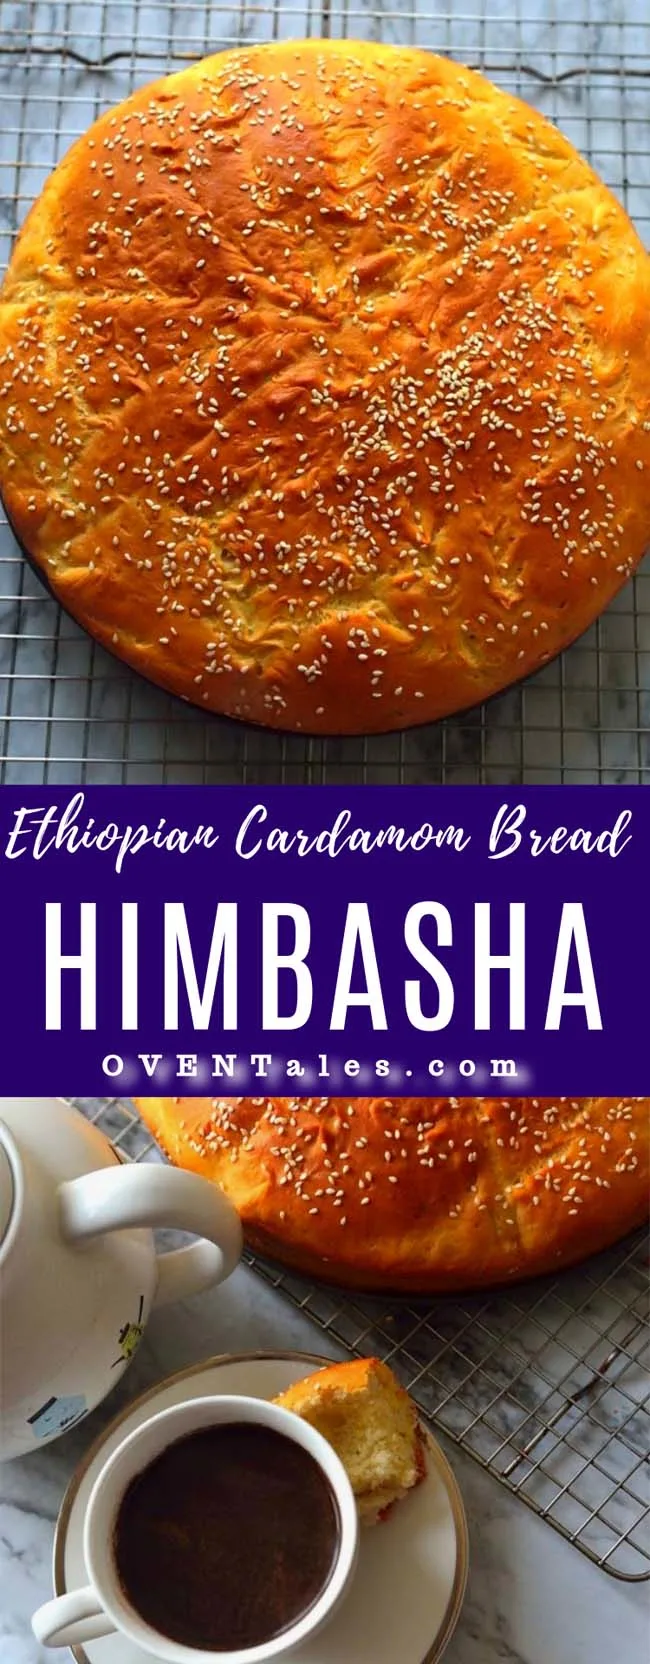 The Ethiopian and Eritrean Celebration bread lightly sweetened and flavored with cardamom